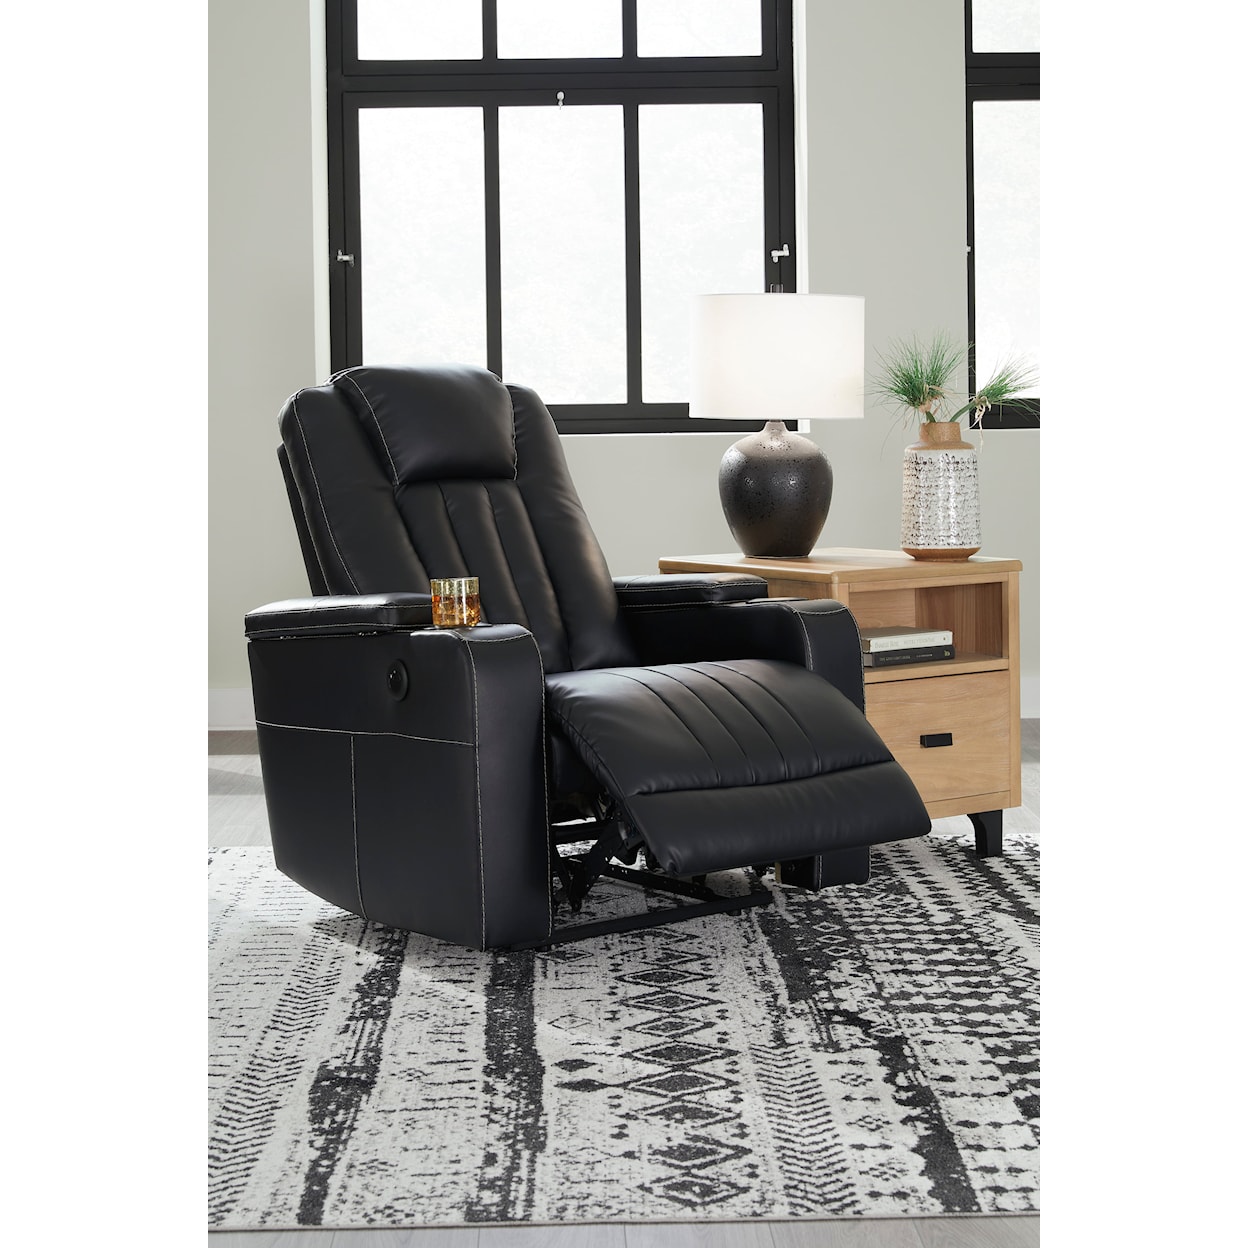 Signature Design by Ashley Center Point Power Recliner